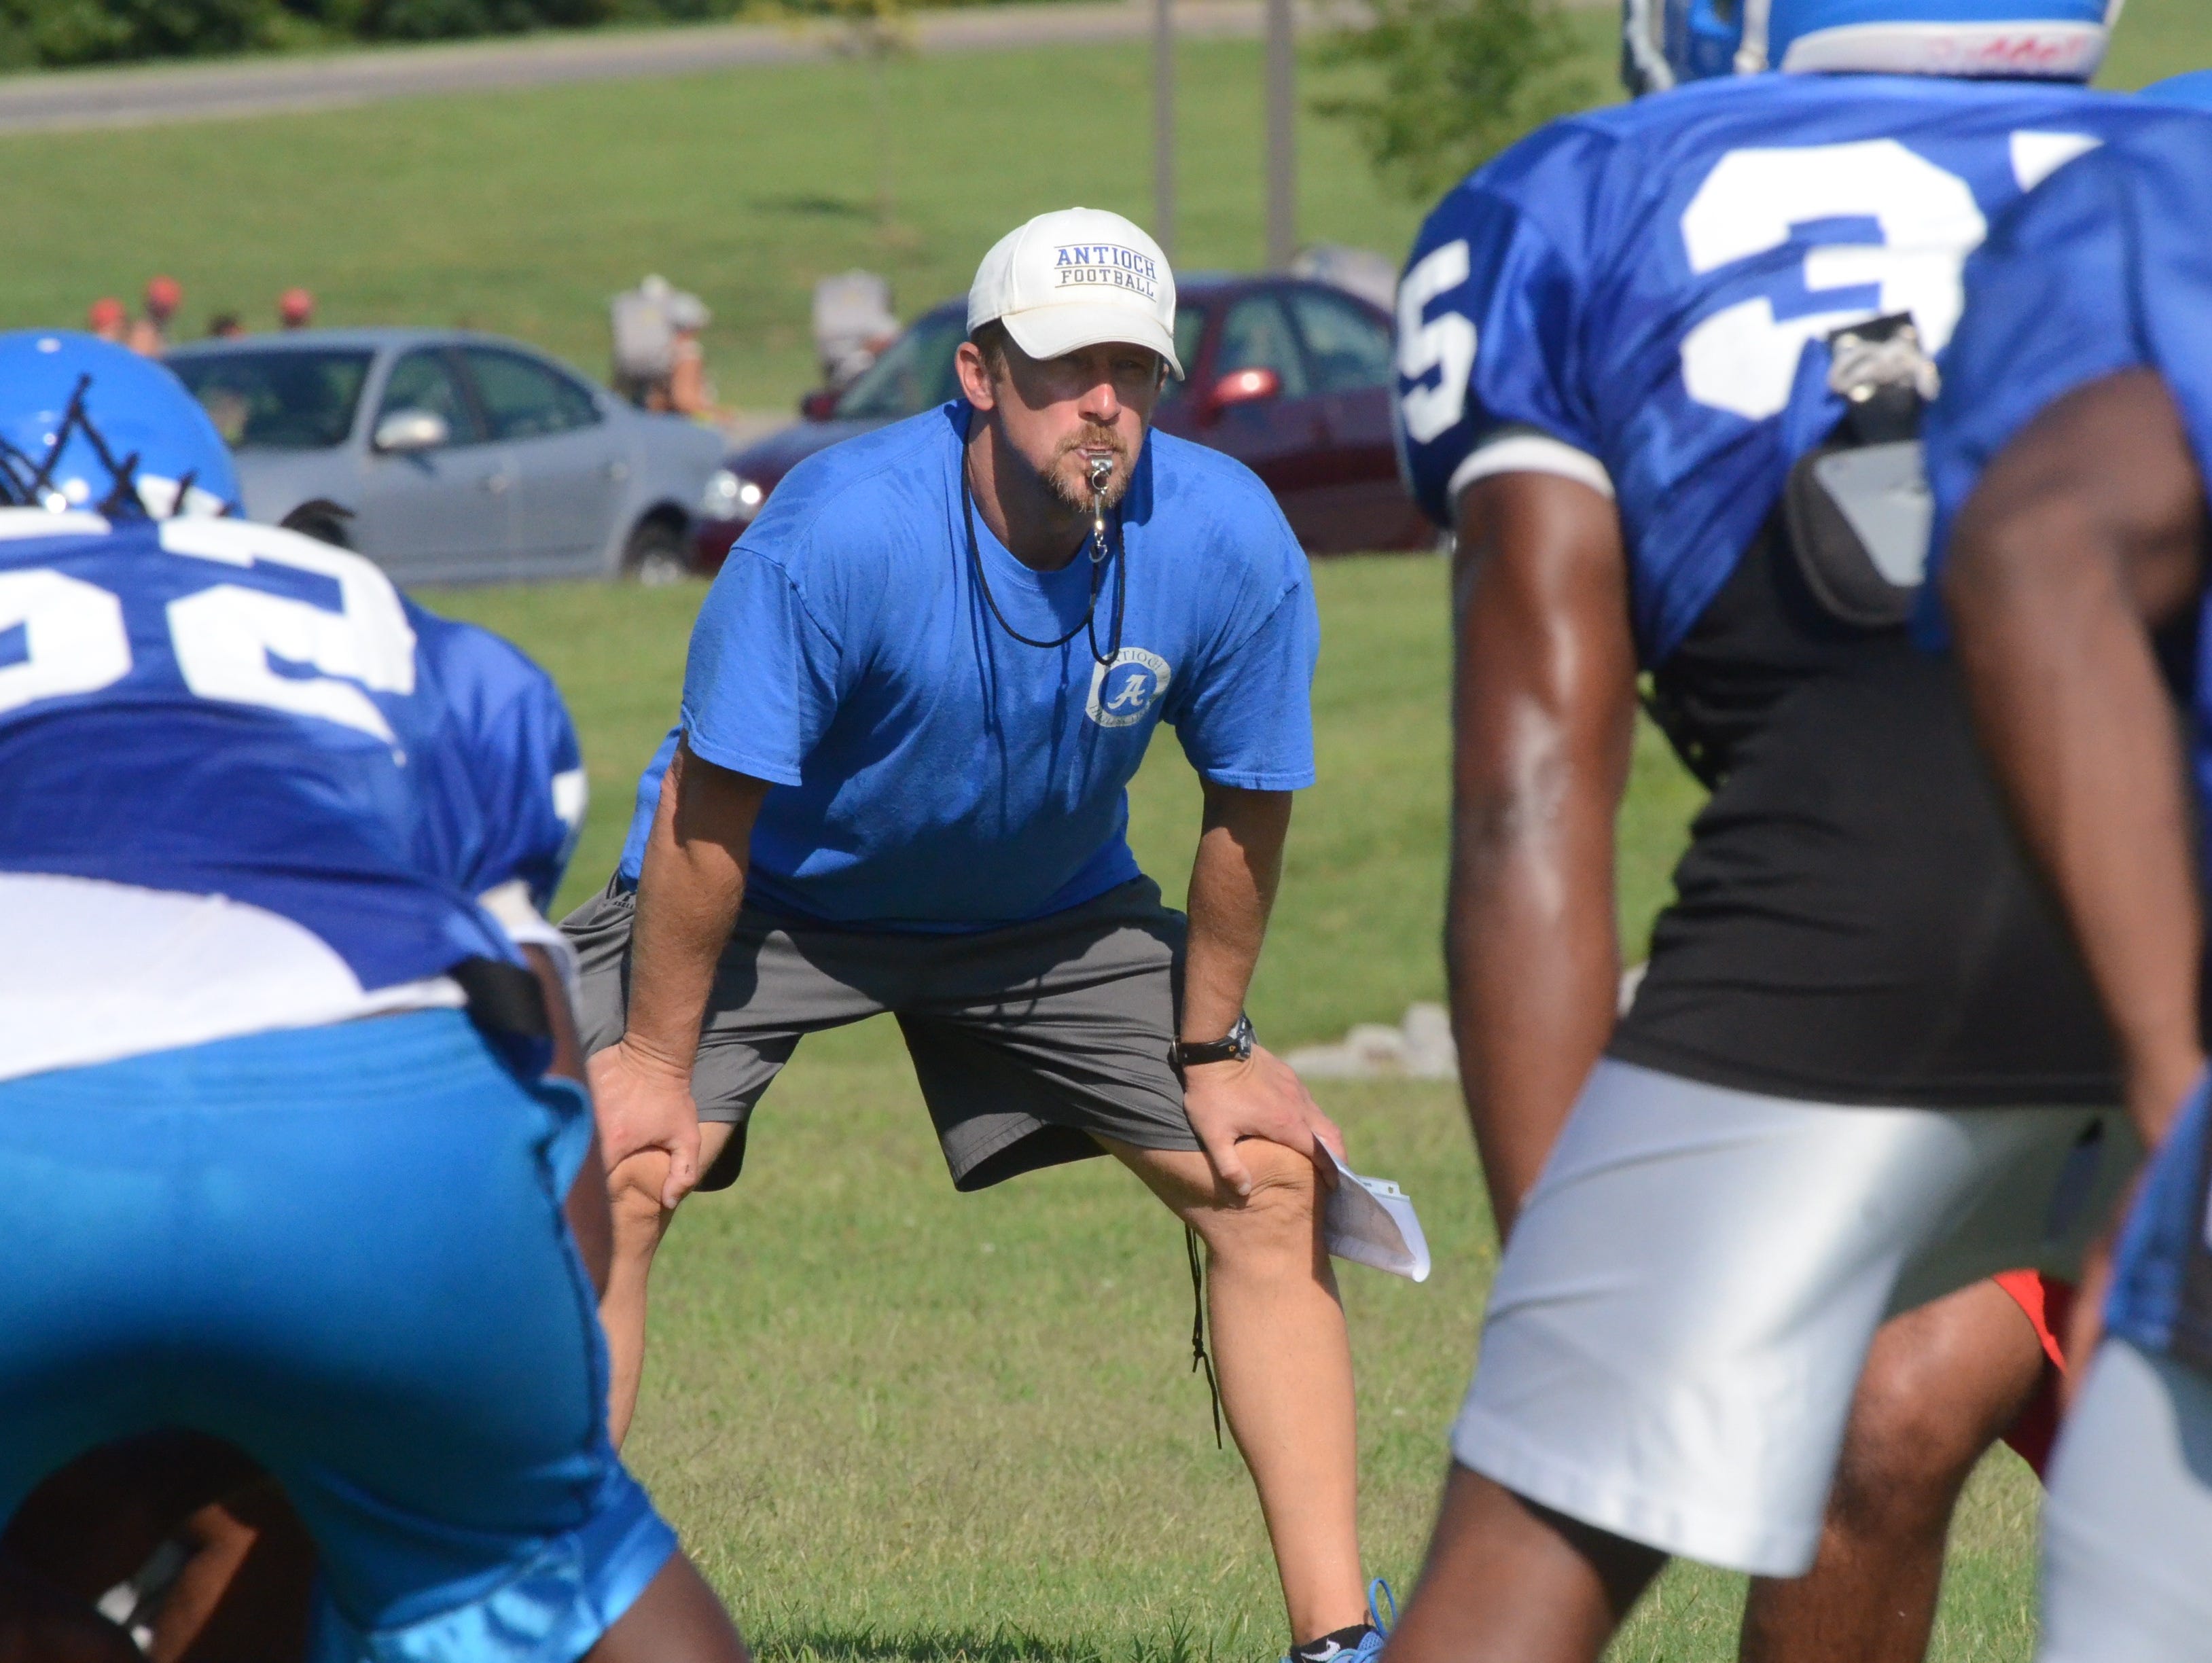 Antioch coach Mike Woodward looks on during practice.